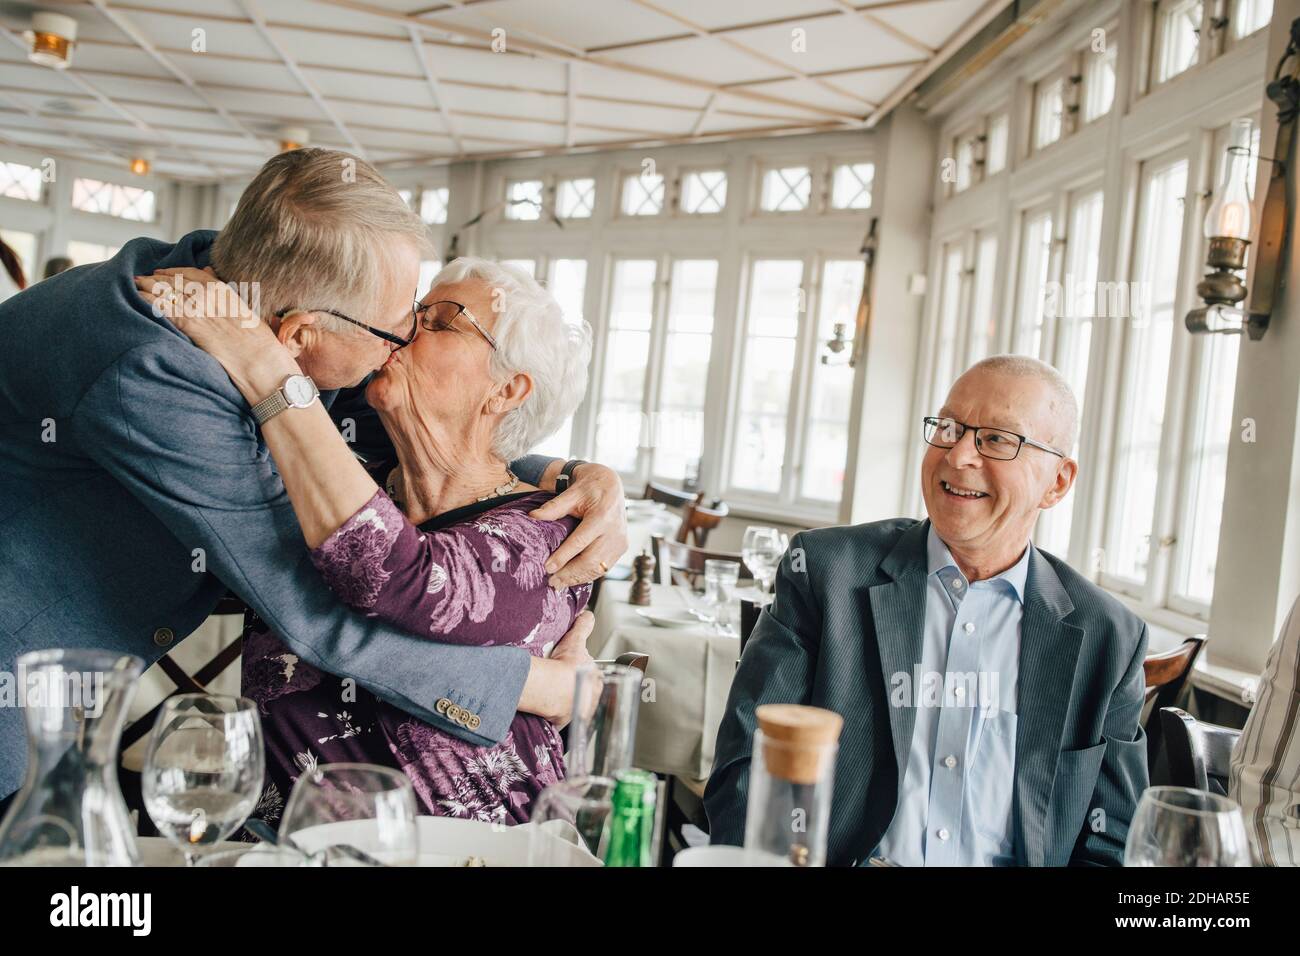 Senior couple kissing while male friend smiling in restaurant Stock Photo